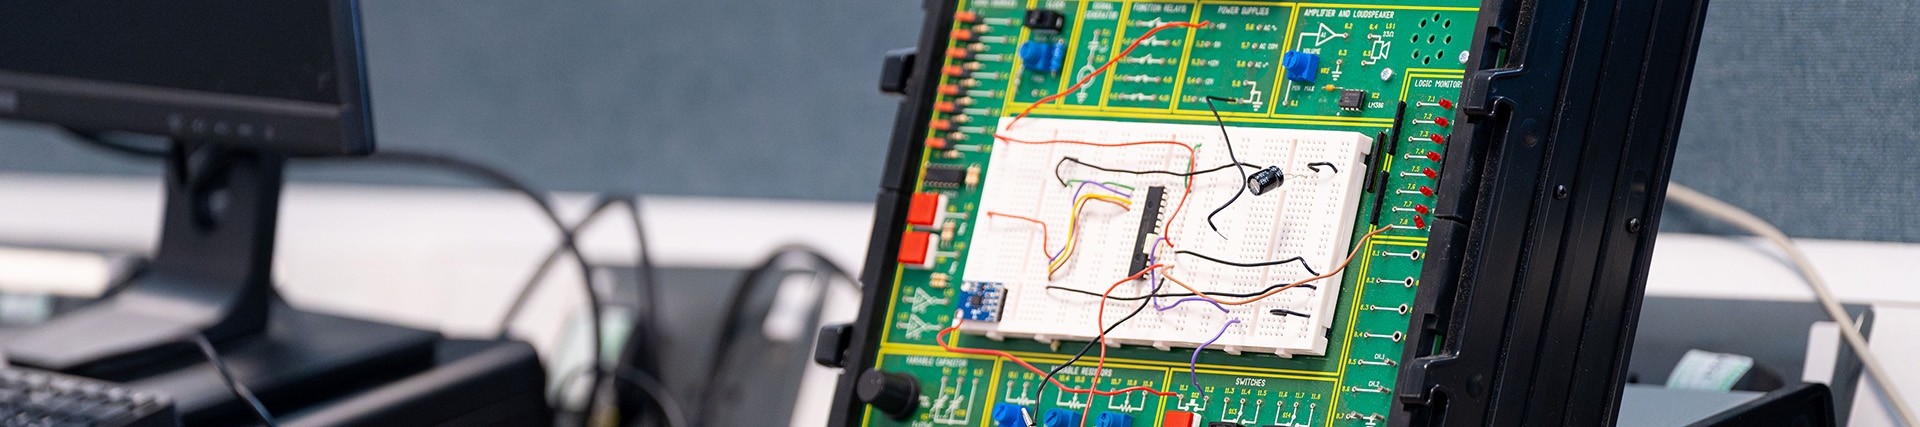 A close-up on the circuit board and wires of a virtual instrument panel.